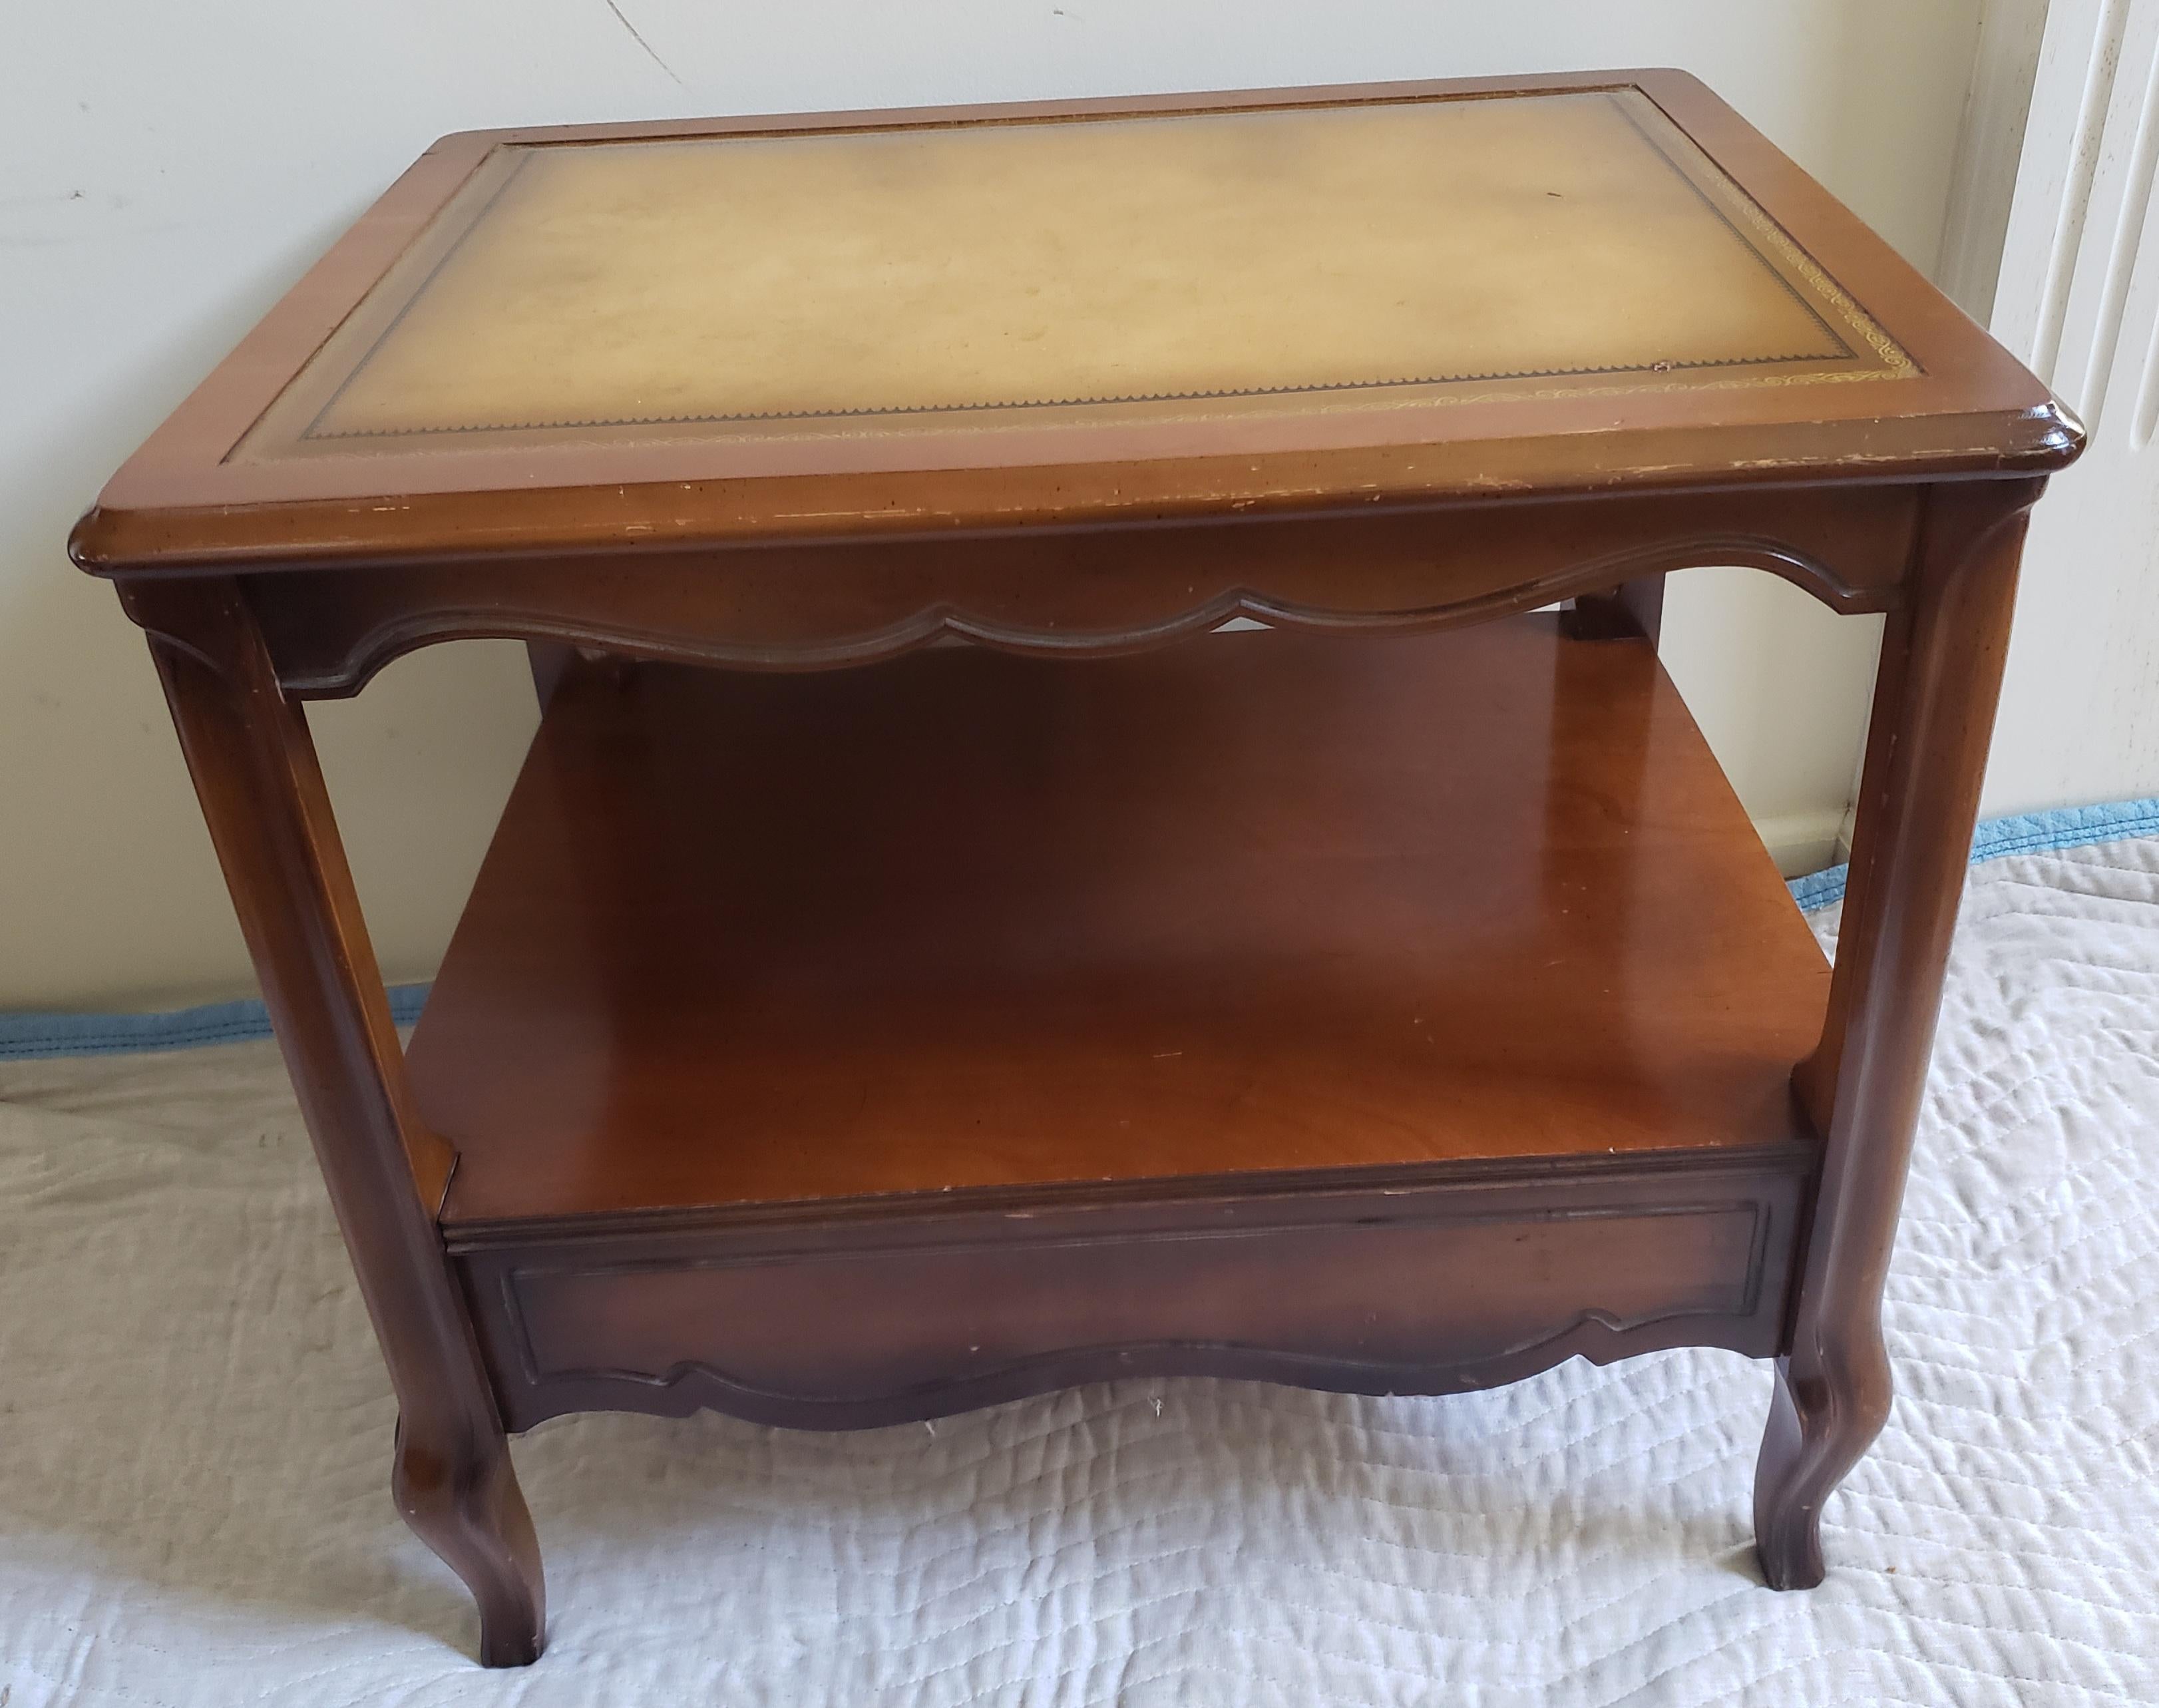 1960s French Provincial Side Tables with Leather and Stinciling Top, a Pair In Good Condition For Sale In Germantown, MD